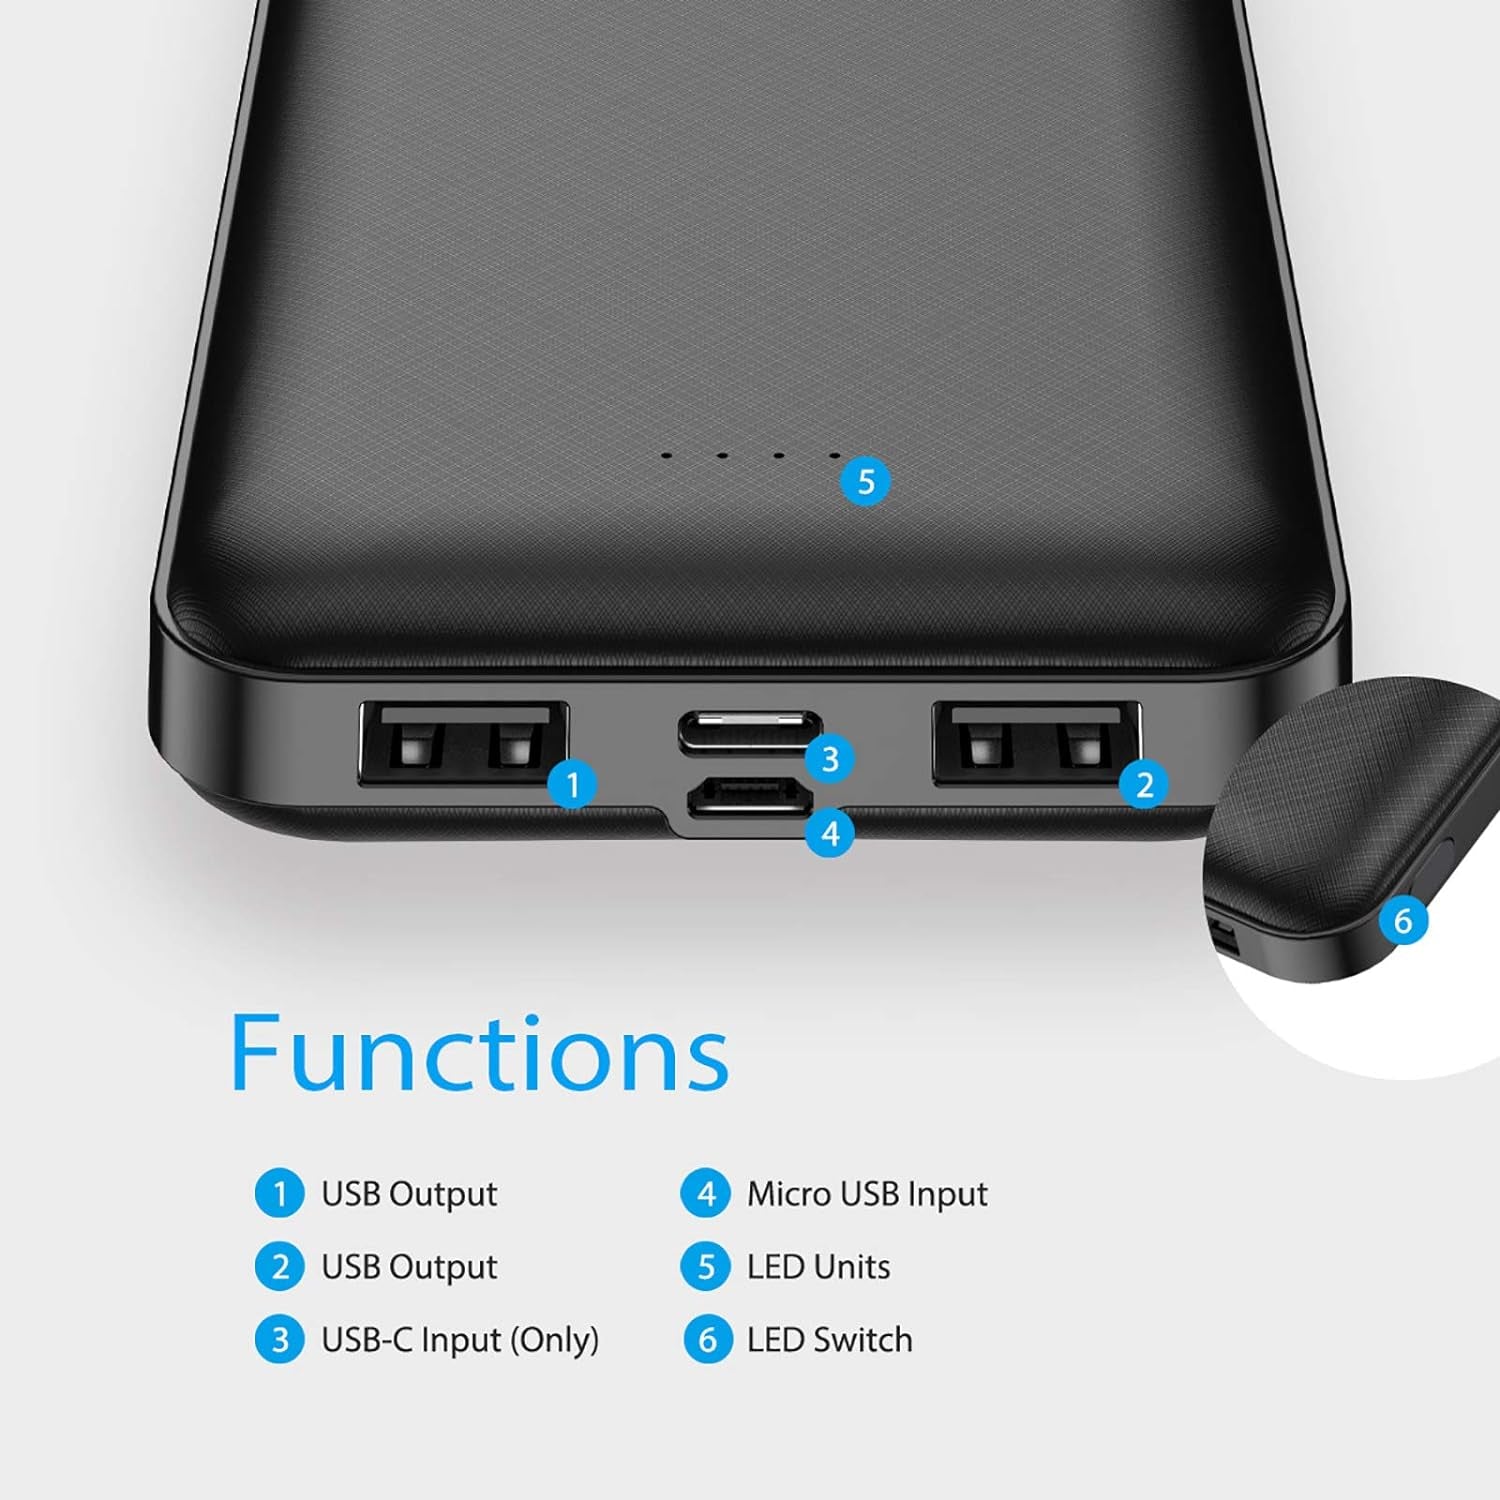 2-Pack 15000Mah Portable Charger, Power Bank/W Two 5V/2A USB Output Ports and USB C Fast Input, Portable Phone Charger Compatible with Iphones, Android Smartphones and More